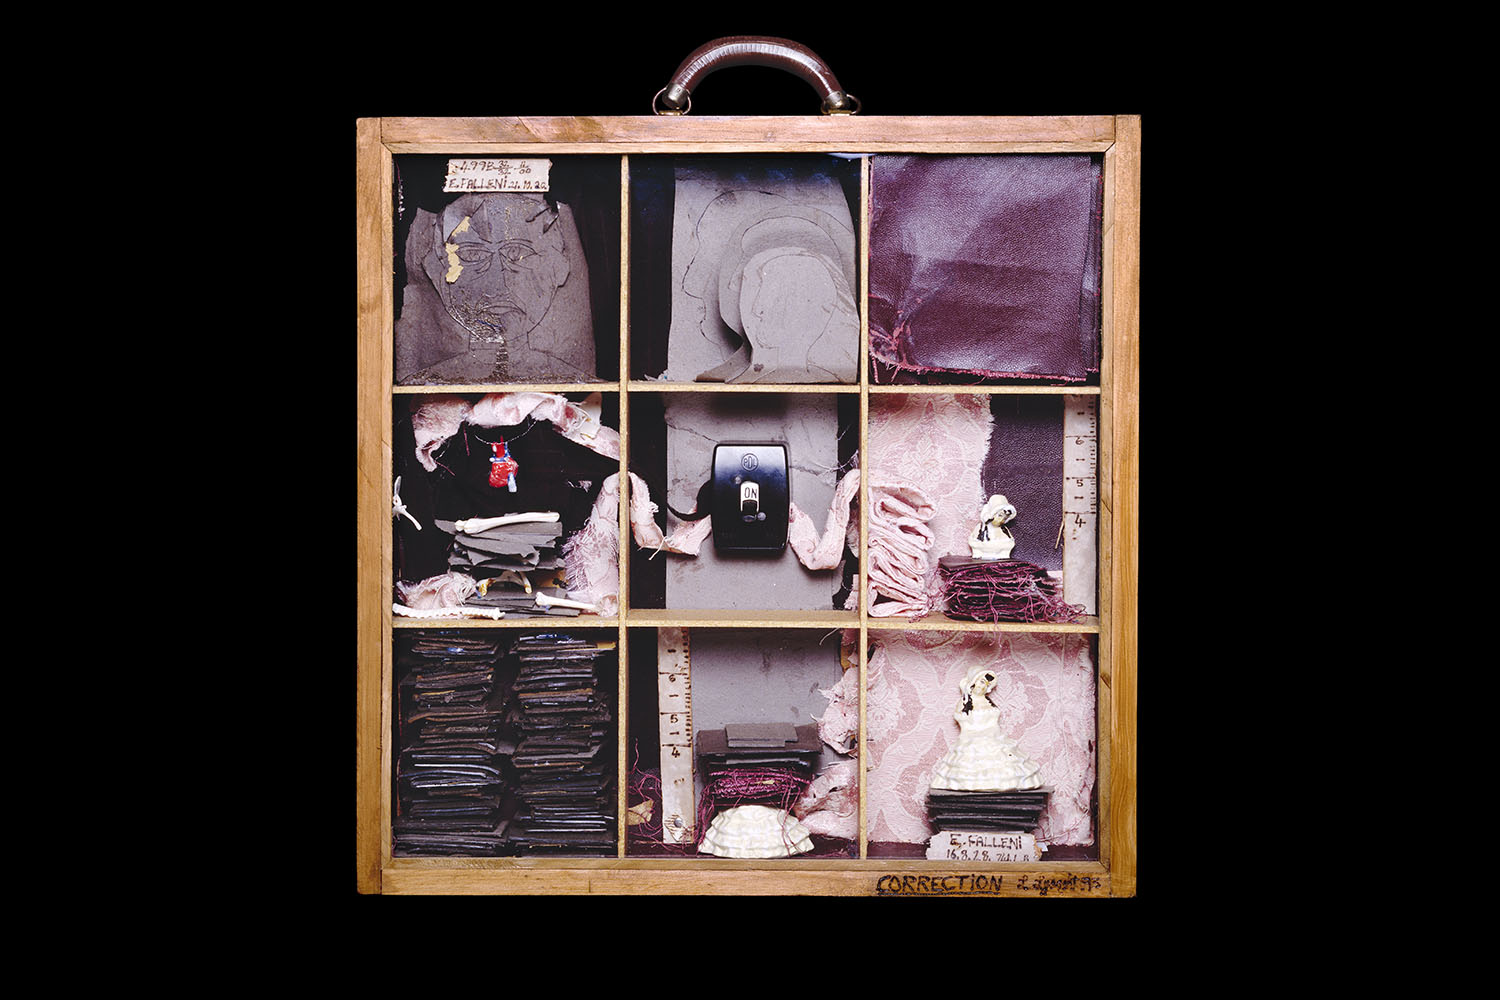 A frame resembling a suitcase divided into nine sections, containing a portrait, fabric swatches, a light switch, and various trinkets